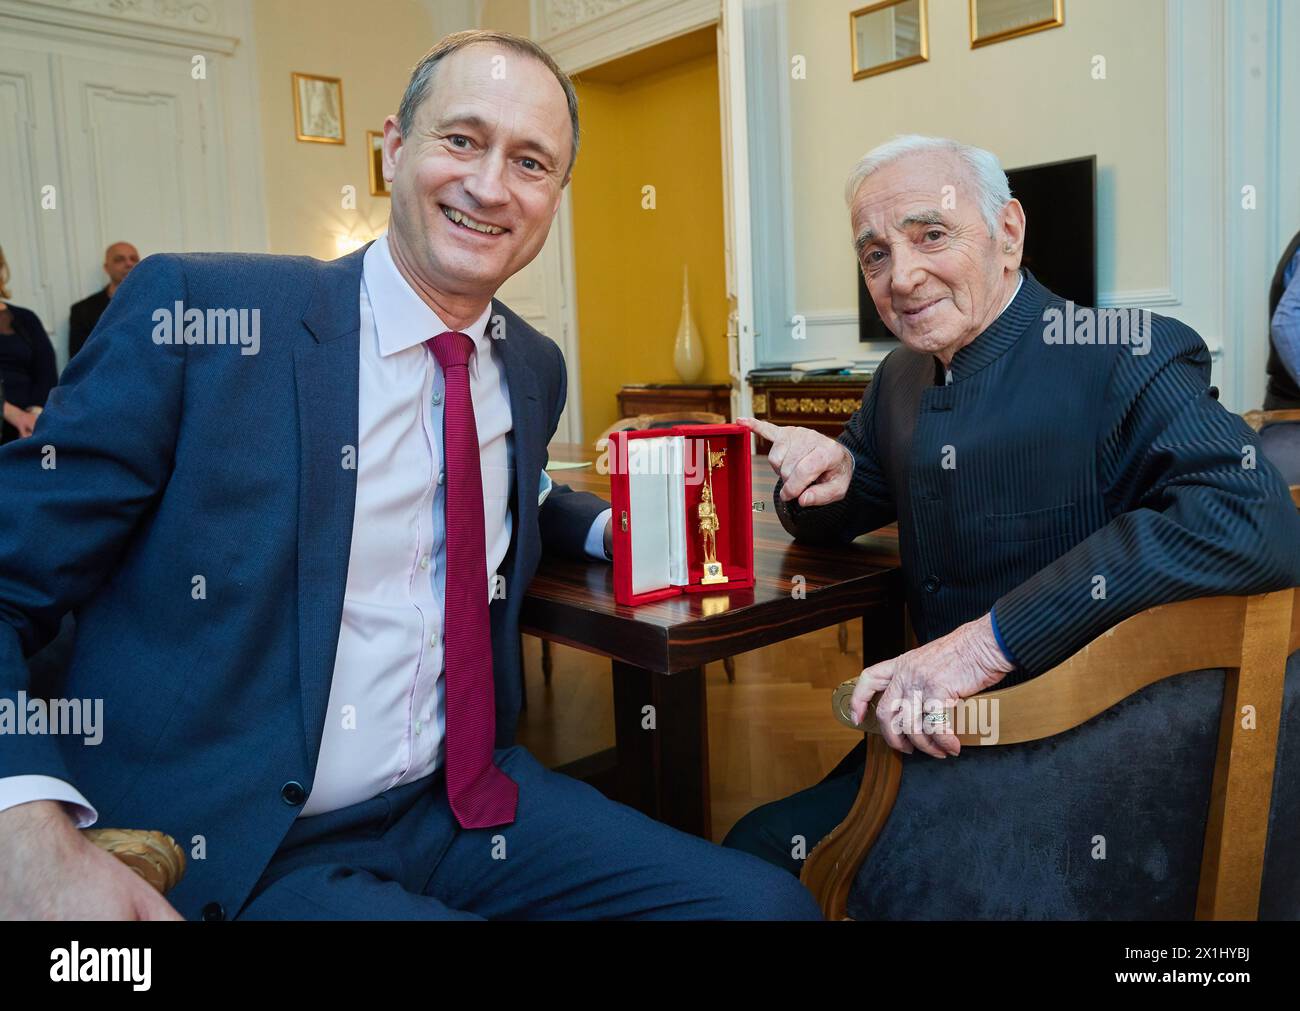 Chanson singer Charles AZNAVOUR receives the 'Golden Rathausmann', a Medal for Service to the City of Vienna from Andreas Mailath Pokorny, in Vienna, Austria, 8. December 2017. - 20171208 PD6910 - Rechteinfo: Rights Managed (RM) Stock Photo